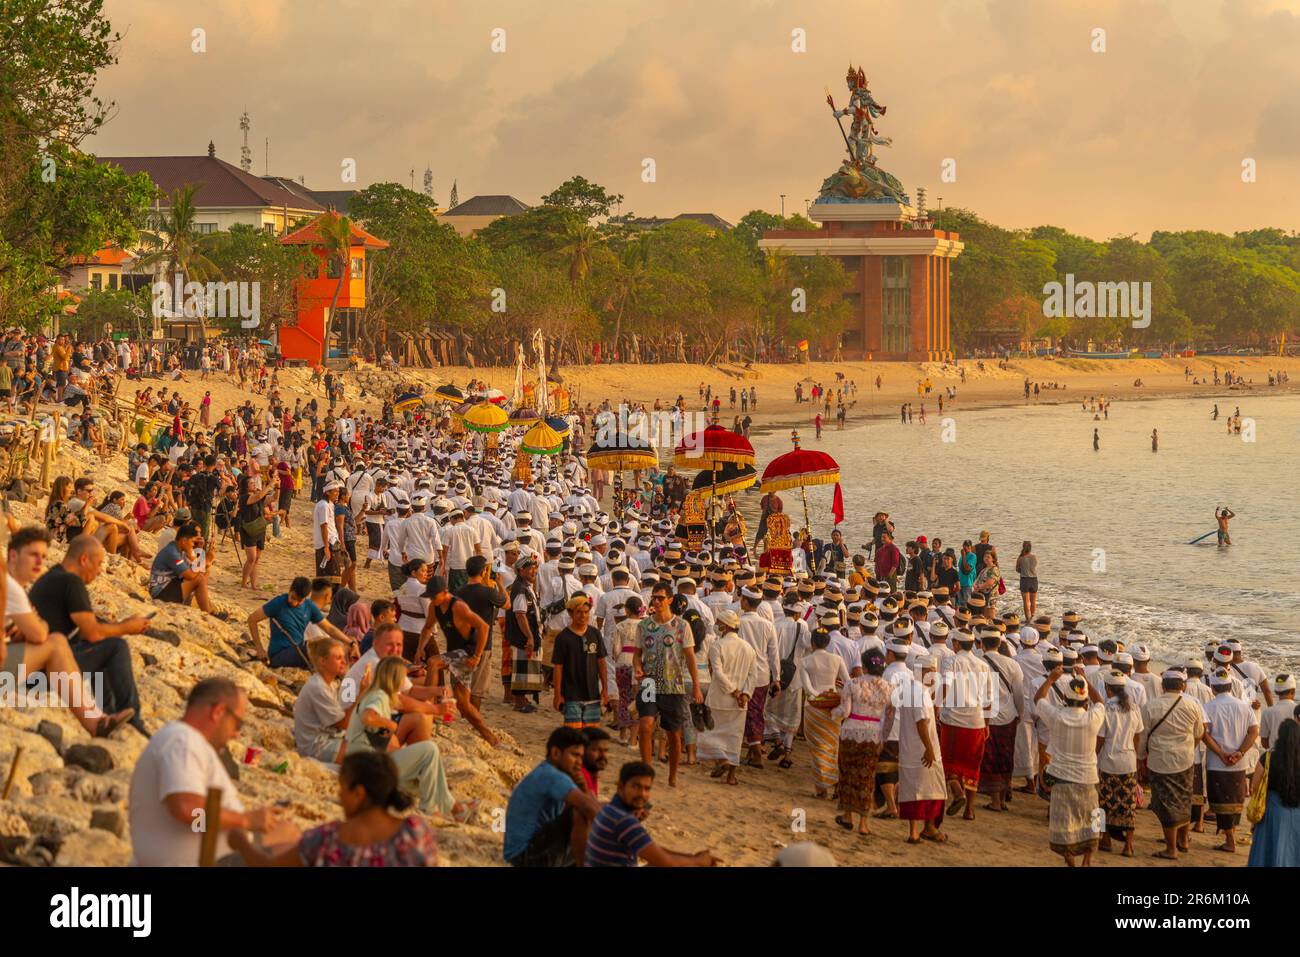 View of colourful offerings procession on Kuta Beach for Nyepi, Balinese New Year Celebrations, Kuta, Bali, Indonesia, South East Asia, Asia Stock Photo